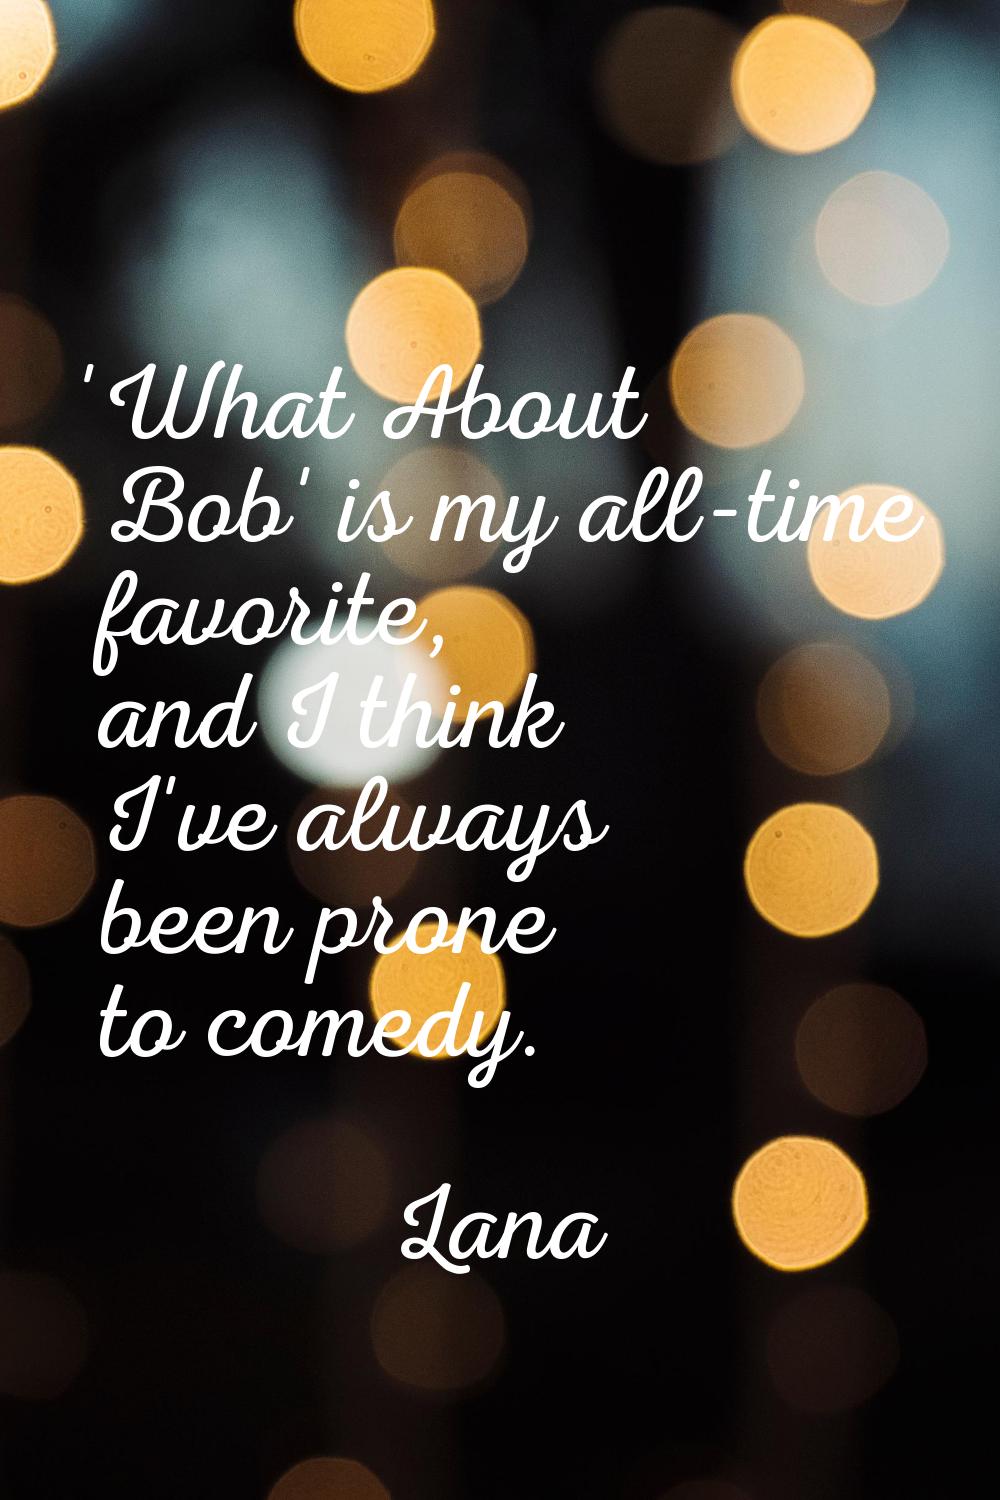 'What About Bob' is my all-time favorite, and I think I've always been prone to comedy.